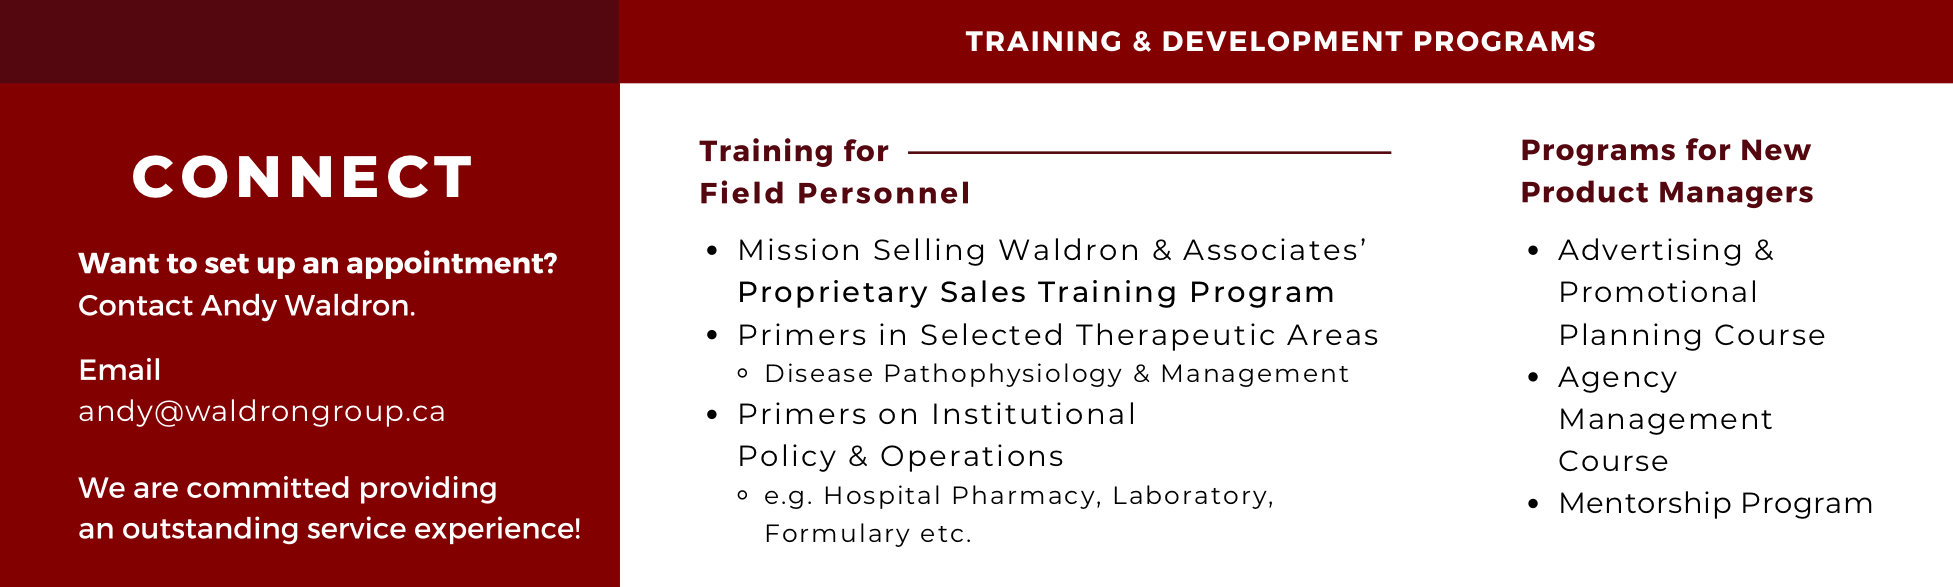 Training & Development Programs. Programs for new product managers. Advertising & promotional planning course, agency management course, mentorship program. Training for Field Personnel. Primers in selected therapeutic areas & on institutional policy, etc